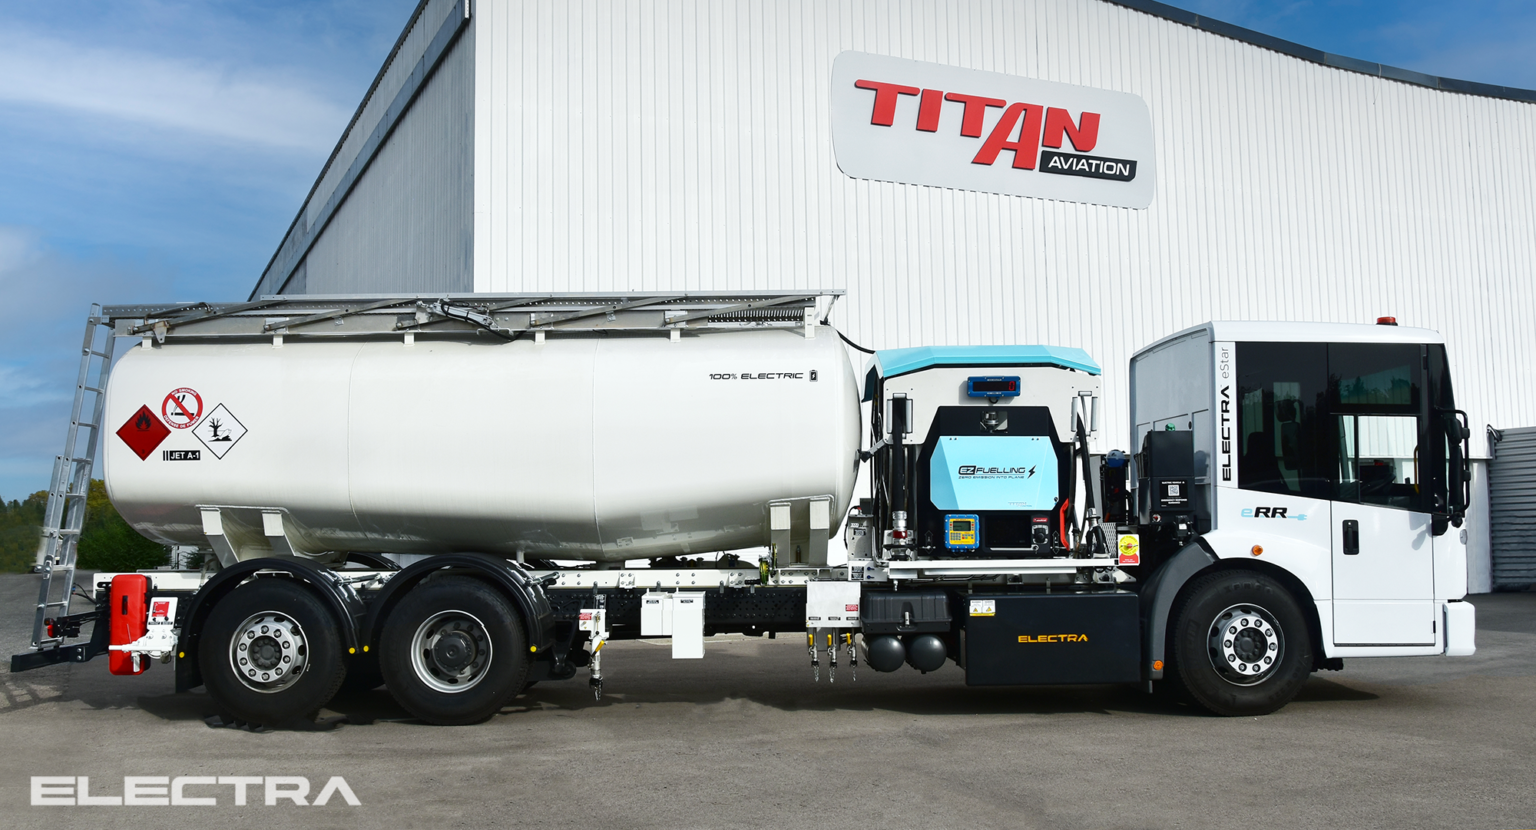 TITAN AVIATION and ELECTRA COMMERCIAL VEHICLES deliver a zeroemission